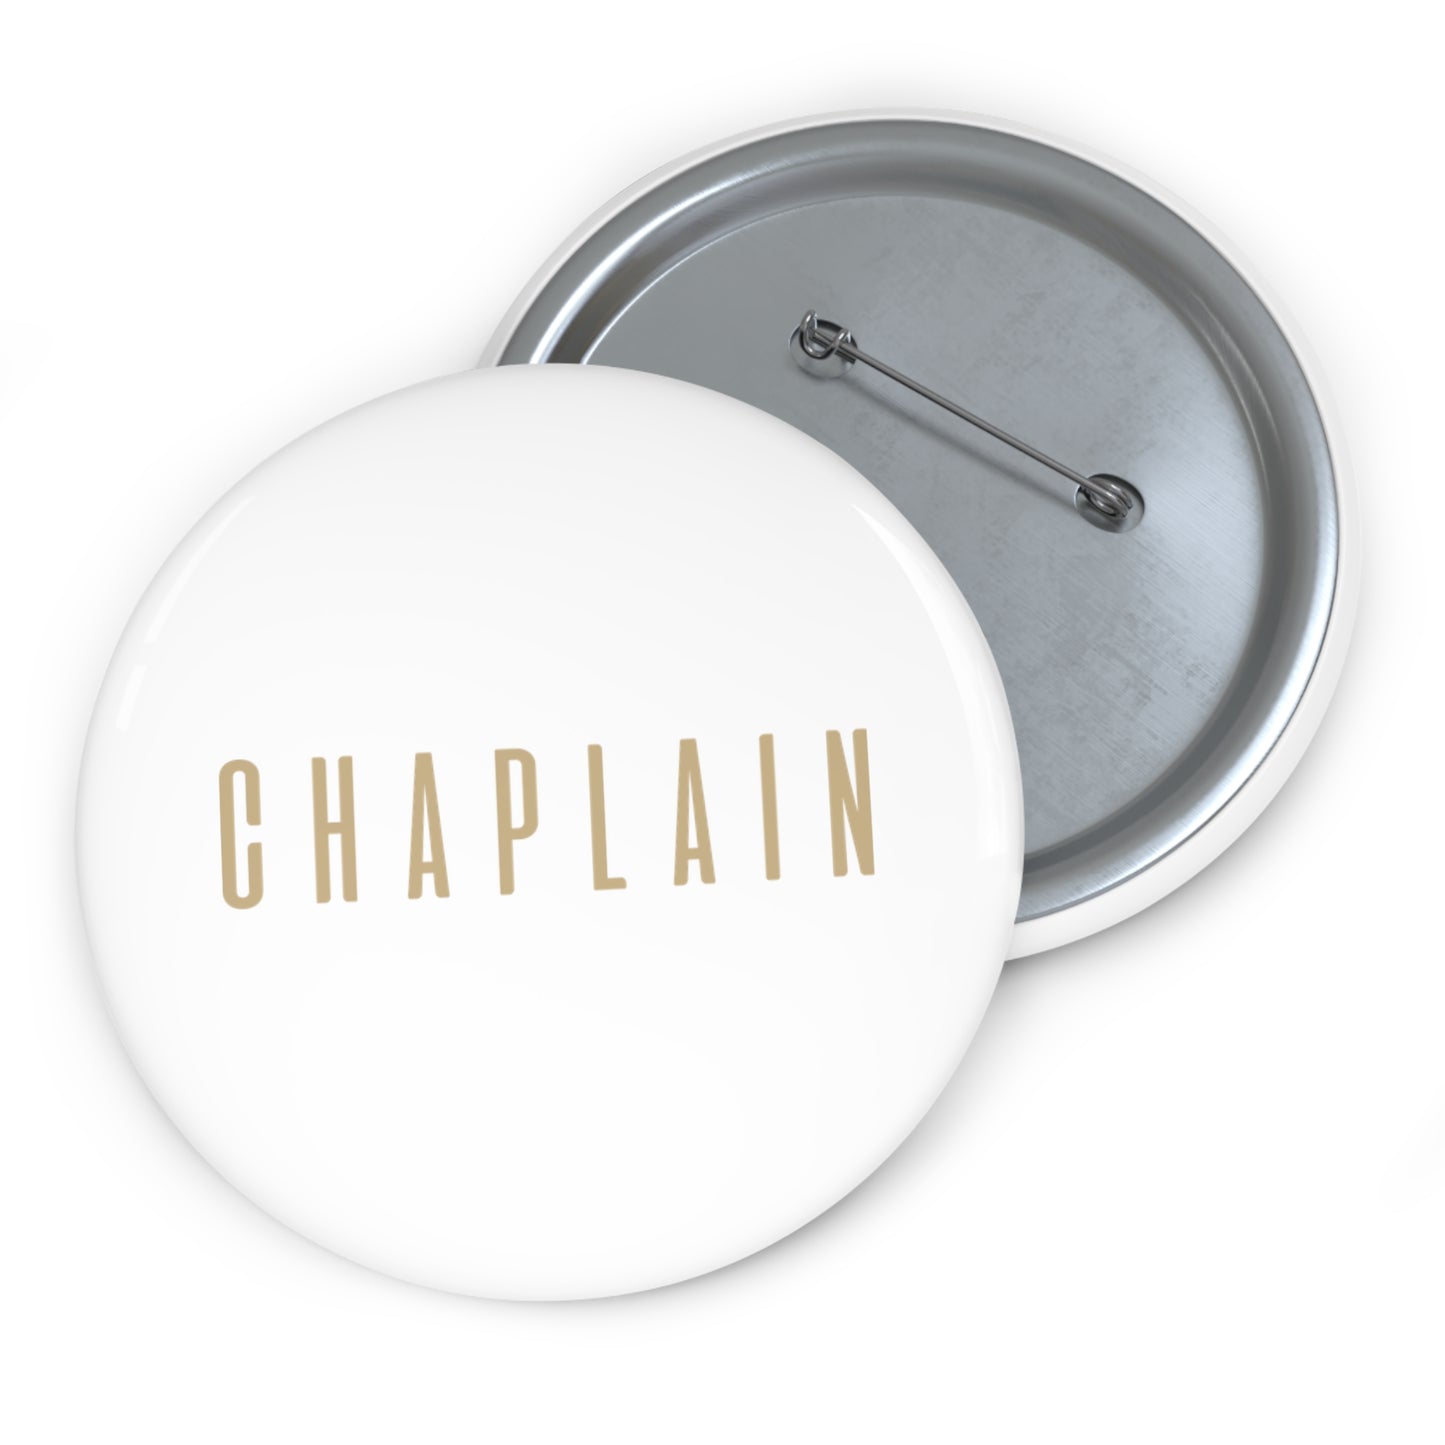 Chaplain Pin Buttons, Chaplain Gifts by Chaplain Life®